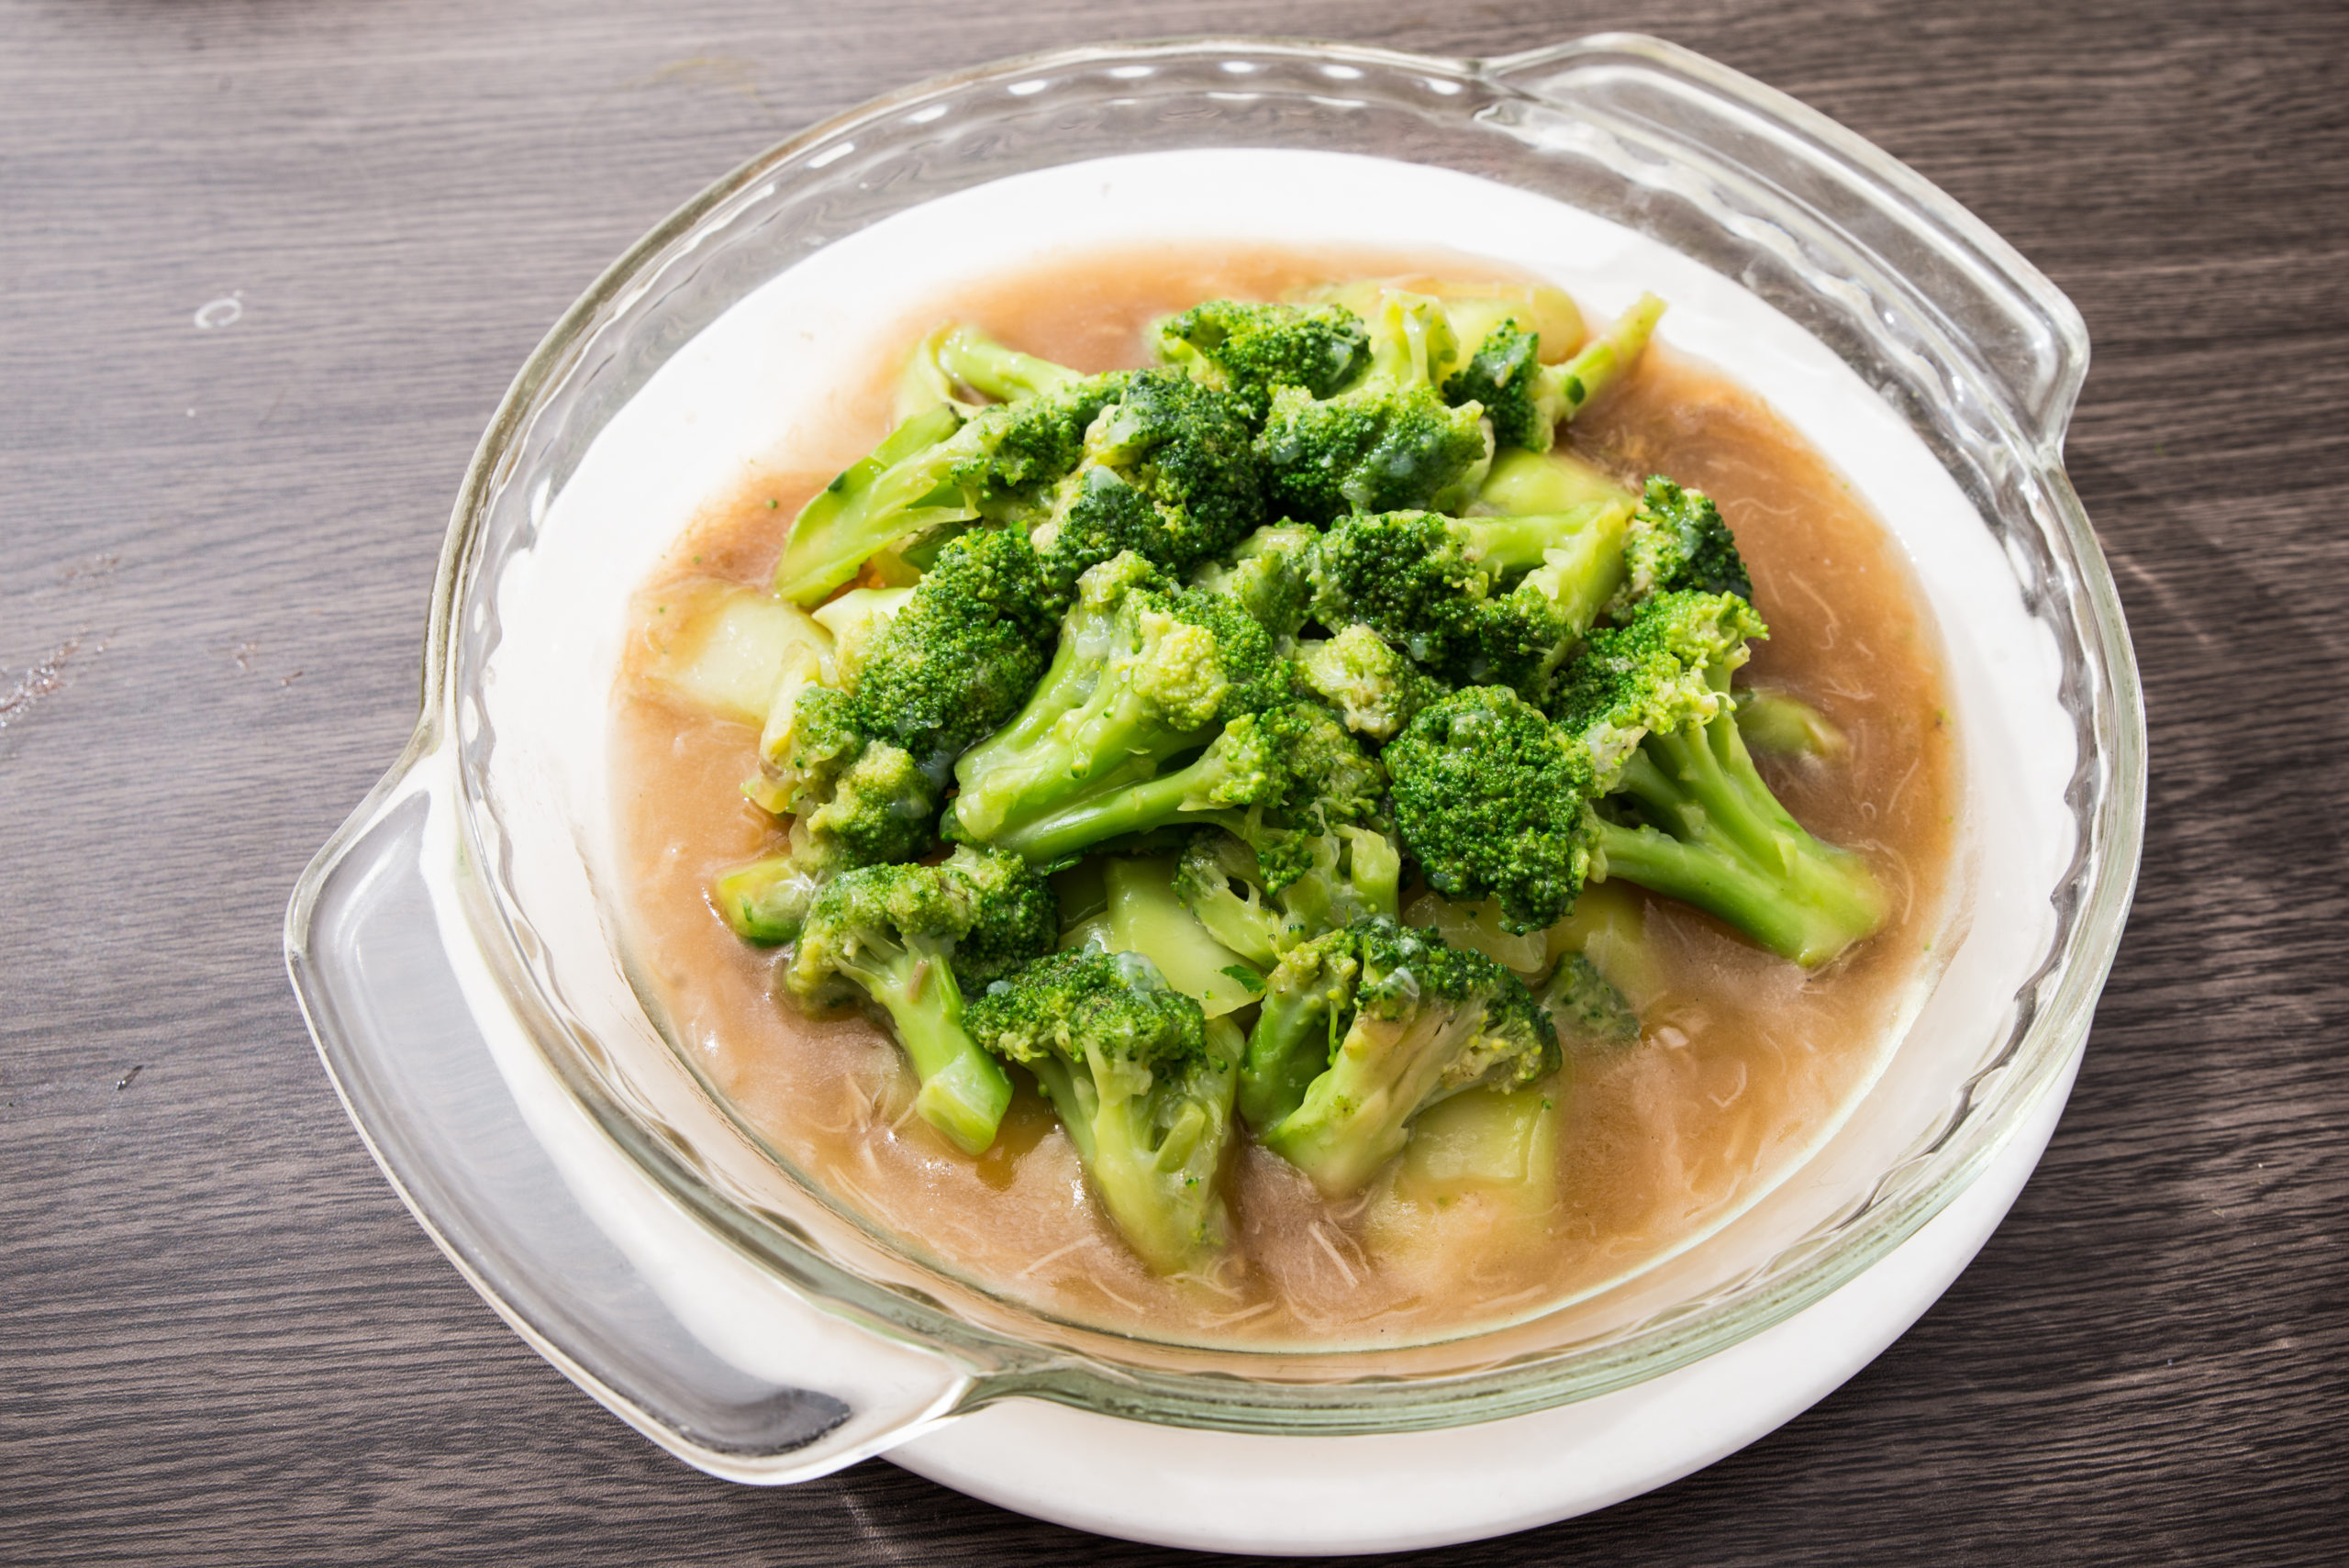 Suateed Broccoli with Dried Scallop